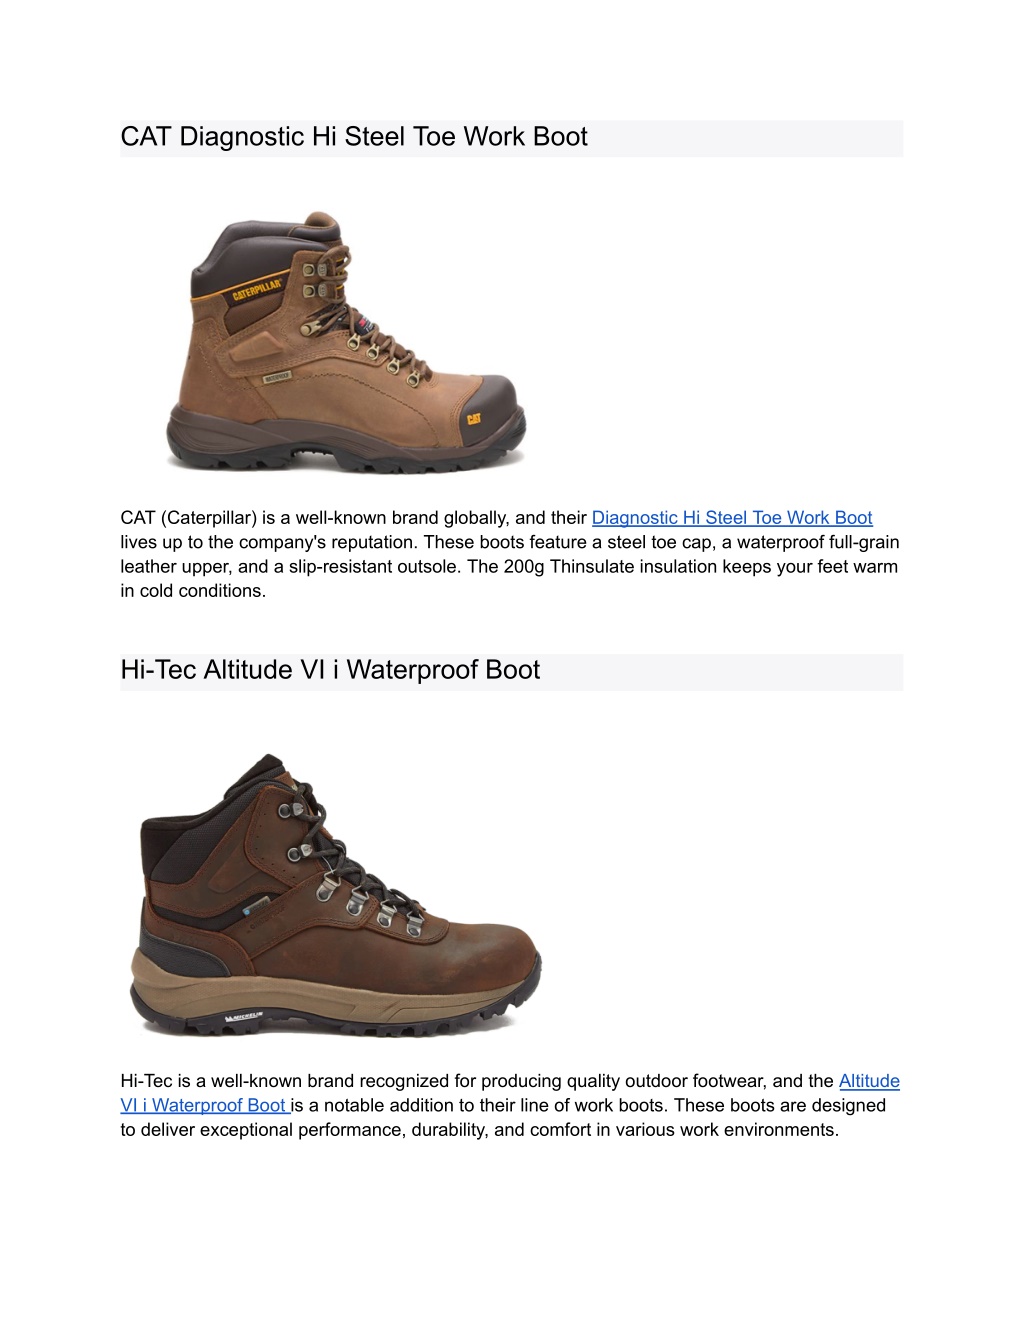 PPT - Top 10 Work Boots in Australia Safety and Comfort Combined ...